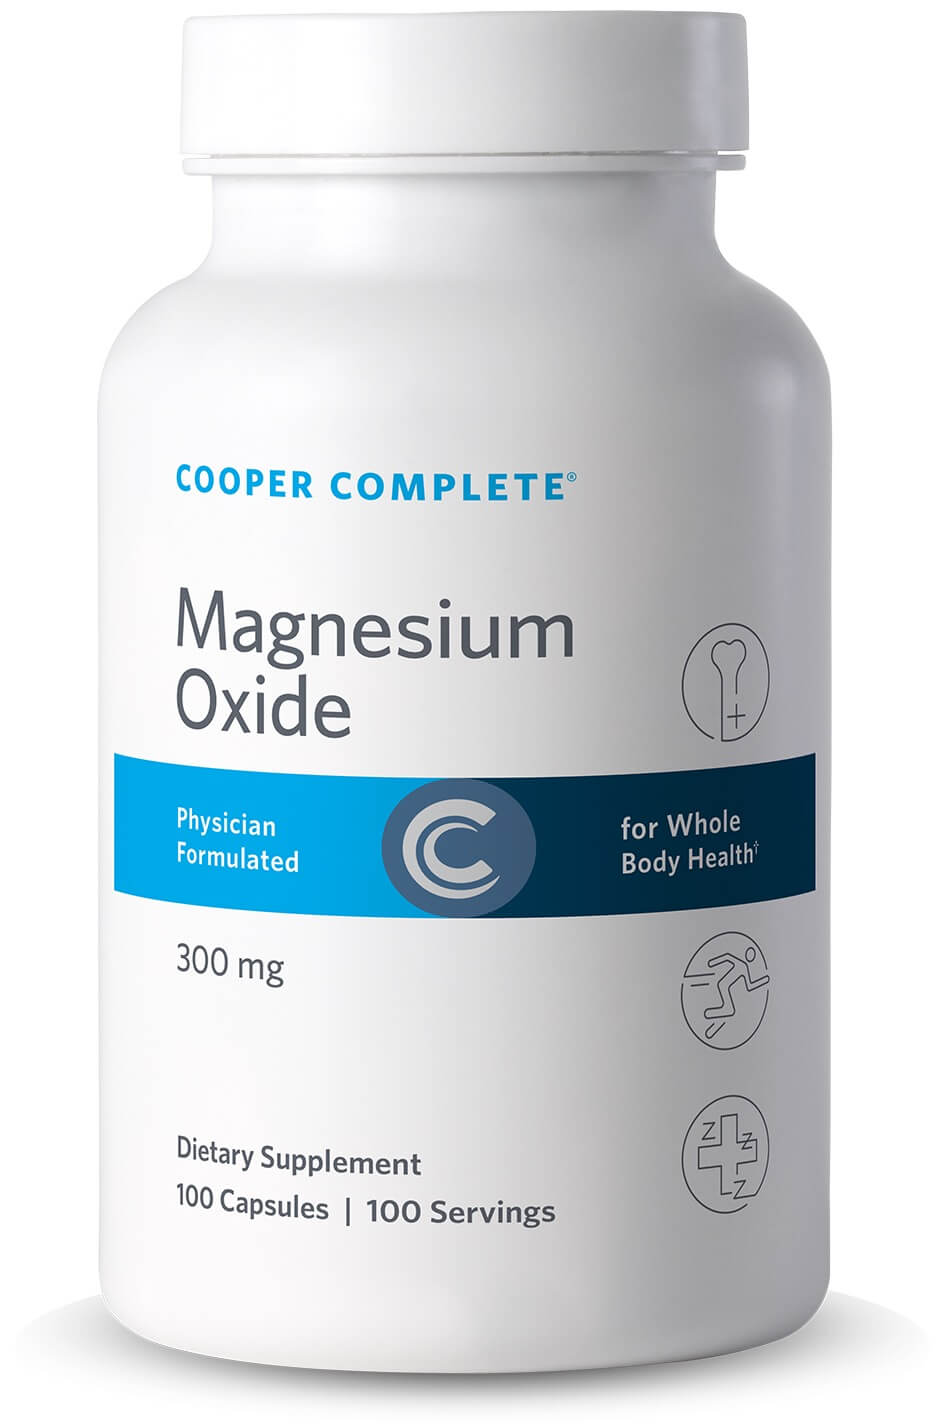 Photo of Cooper Complete 300 mg Magnesium Oxide Supplement bottle